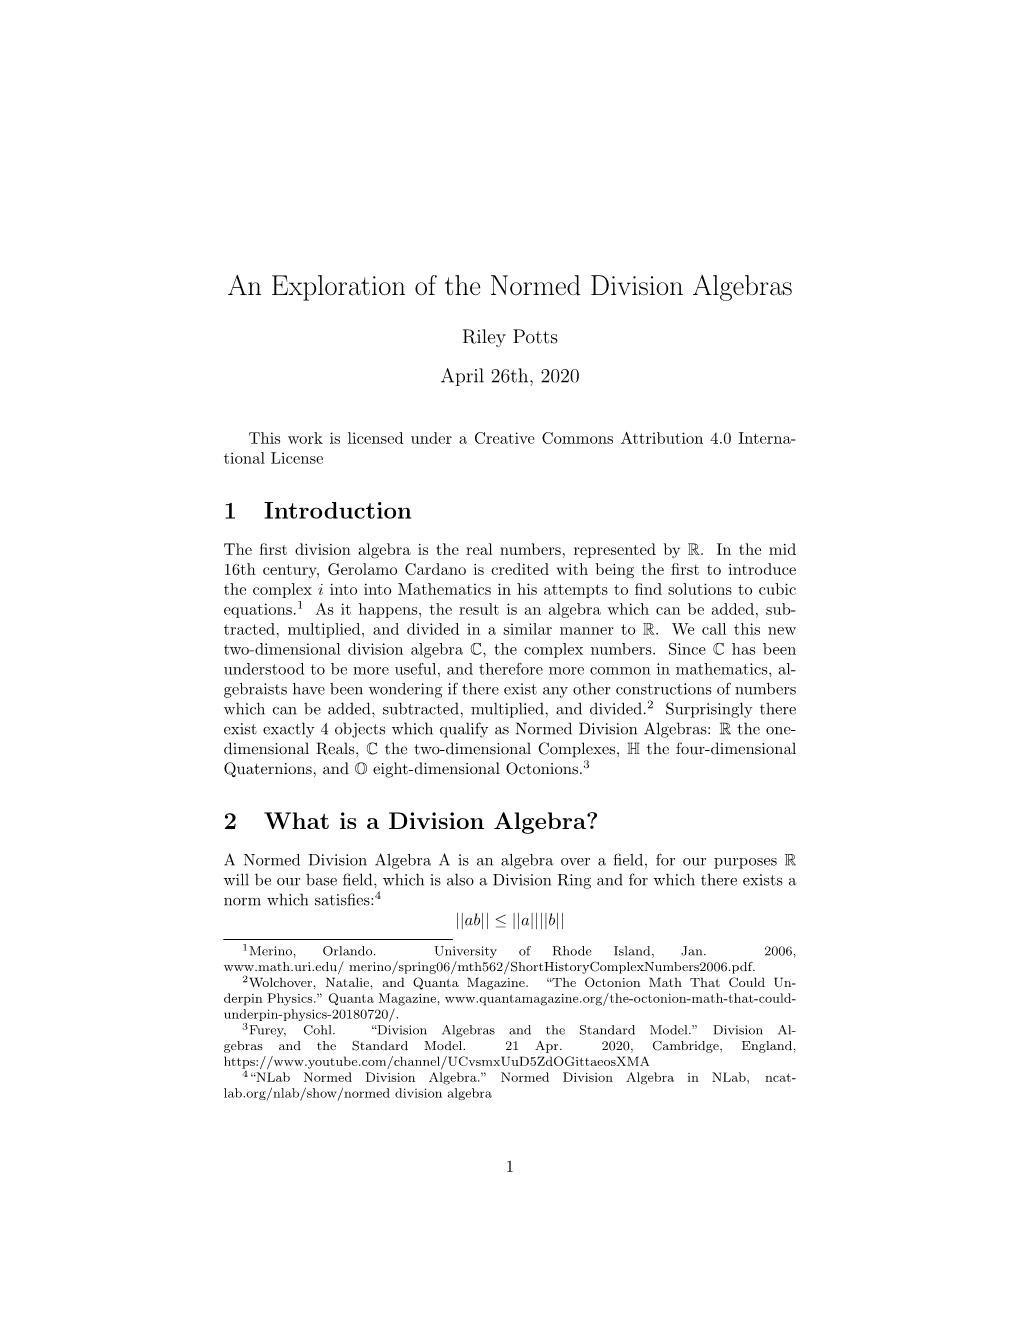 An Exploration of the Normed Division Algebras